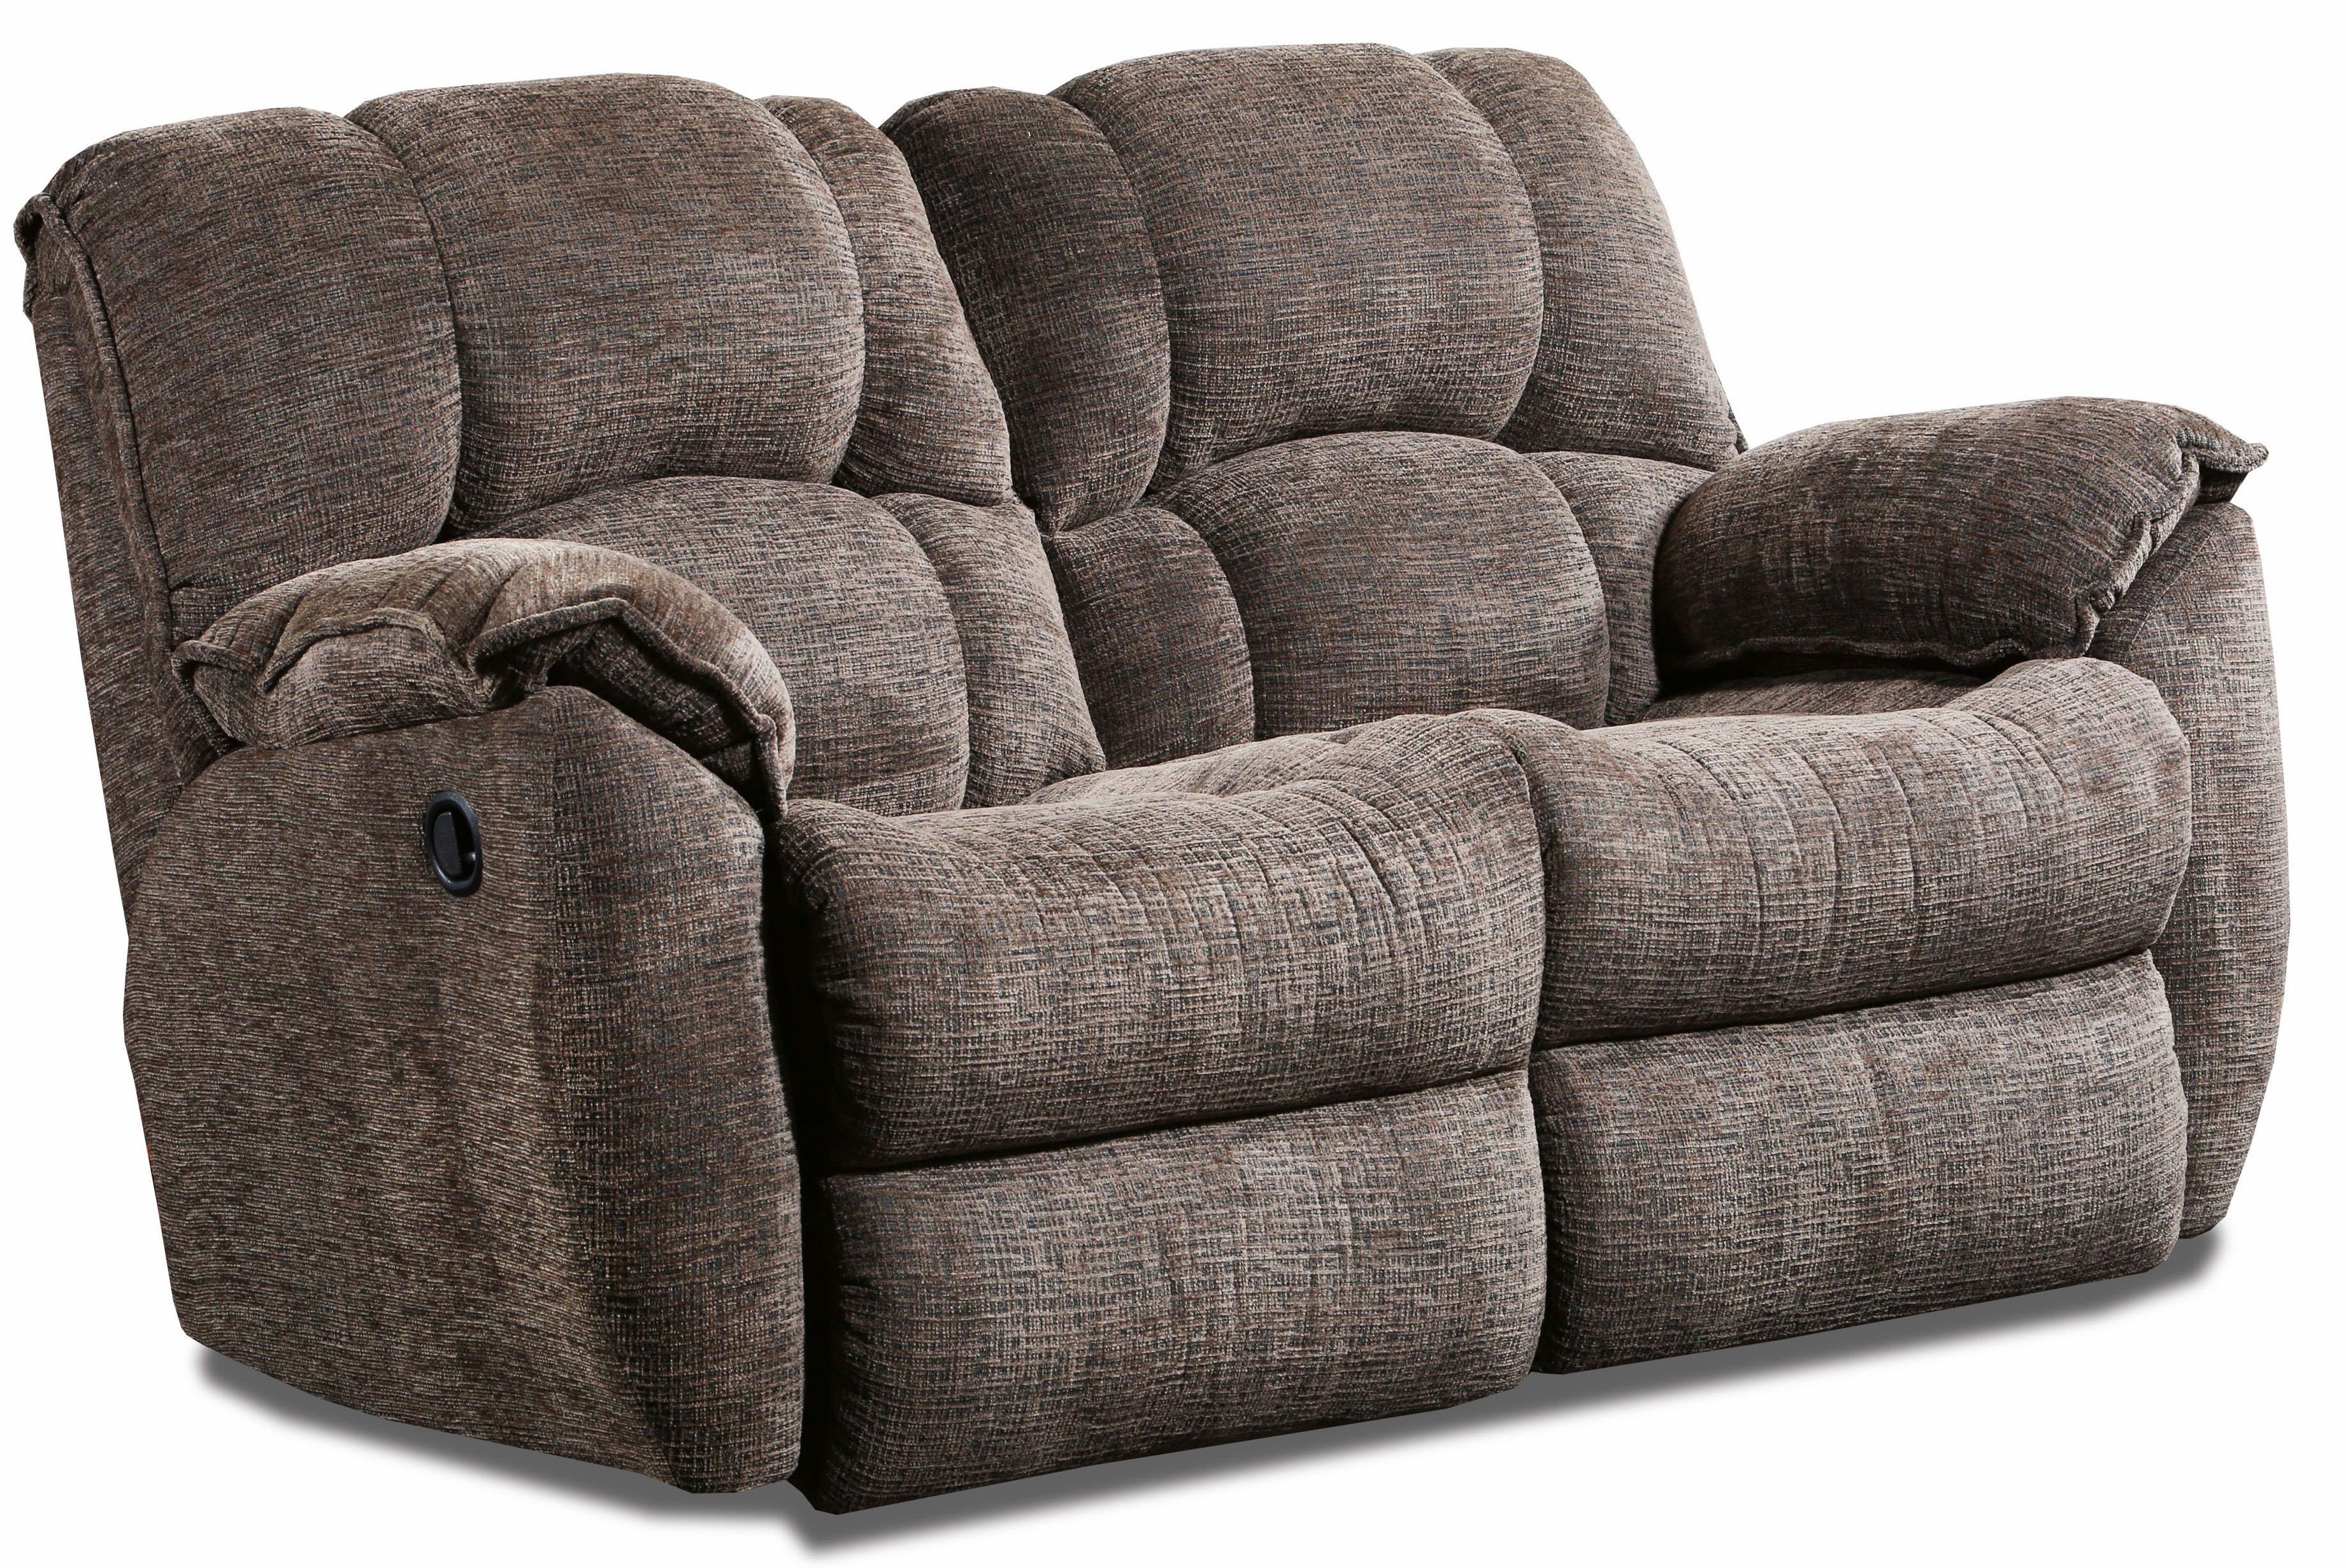 Southern Motion Weston Brown Double Rocking Reclining Loveseat In Weston Rocking Chairs (View 16 of 20)